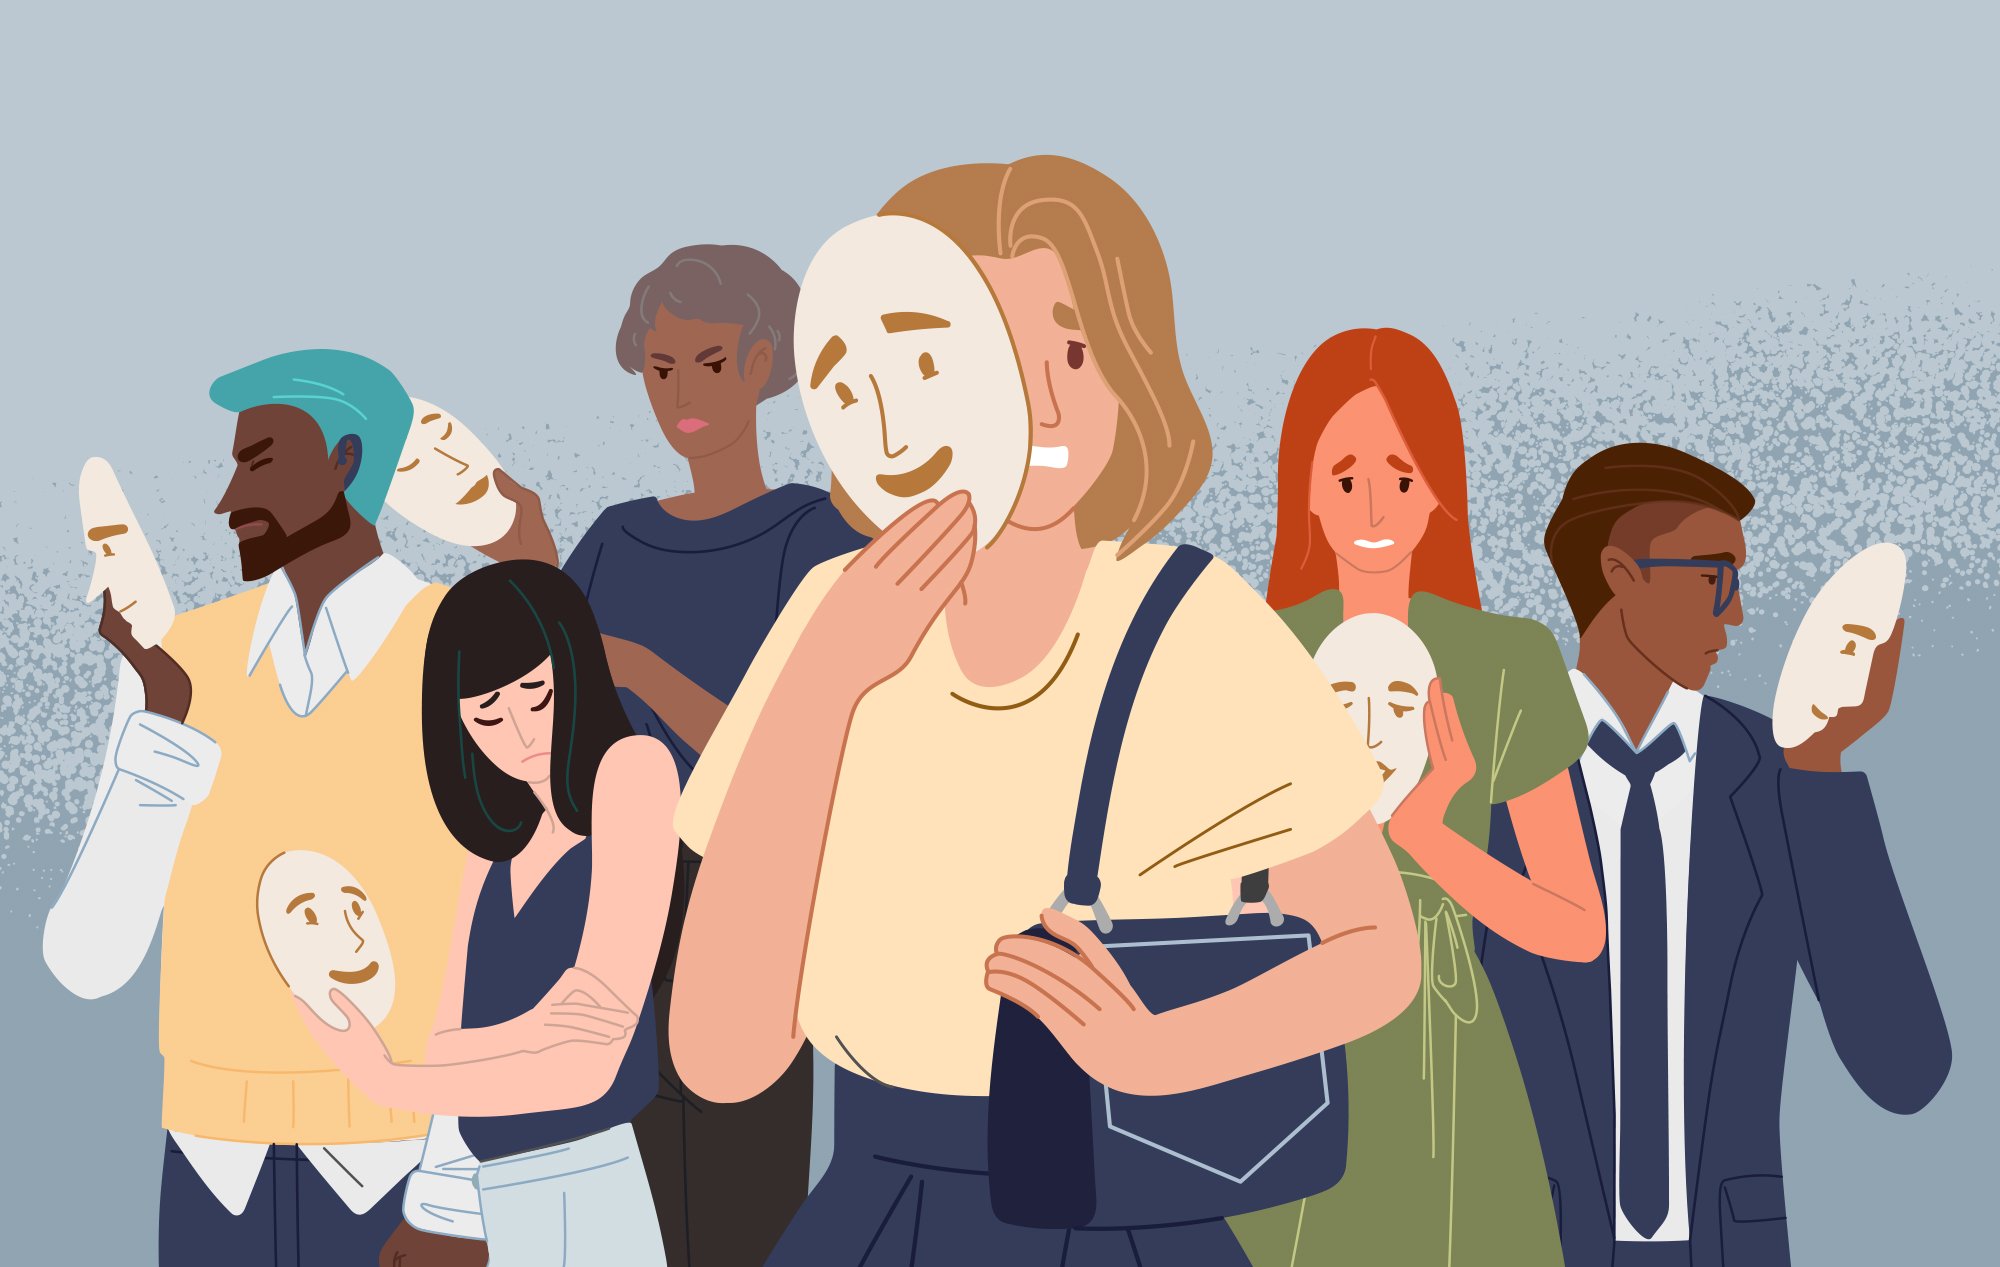 Illustration of a group of professionals holding smiling masks; their true expressions are of sadness, worry and discontent.